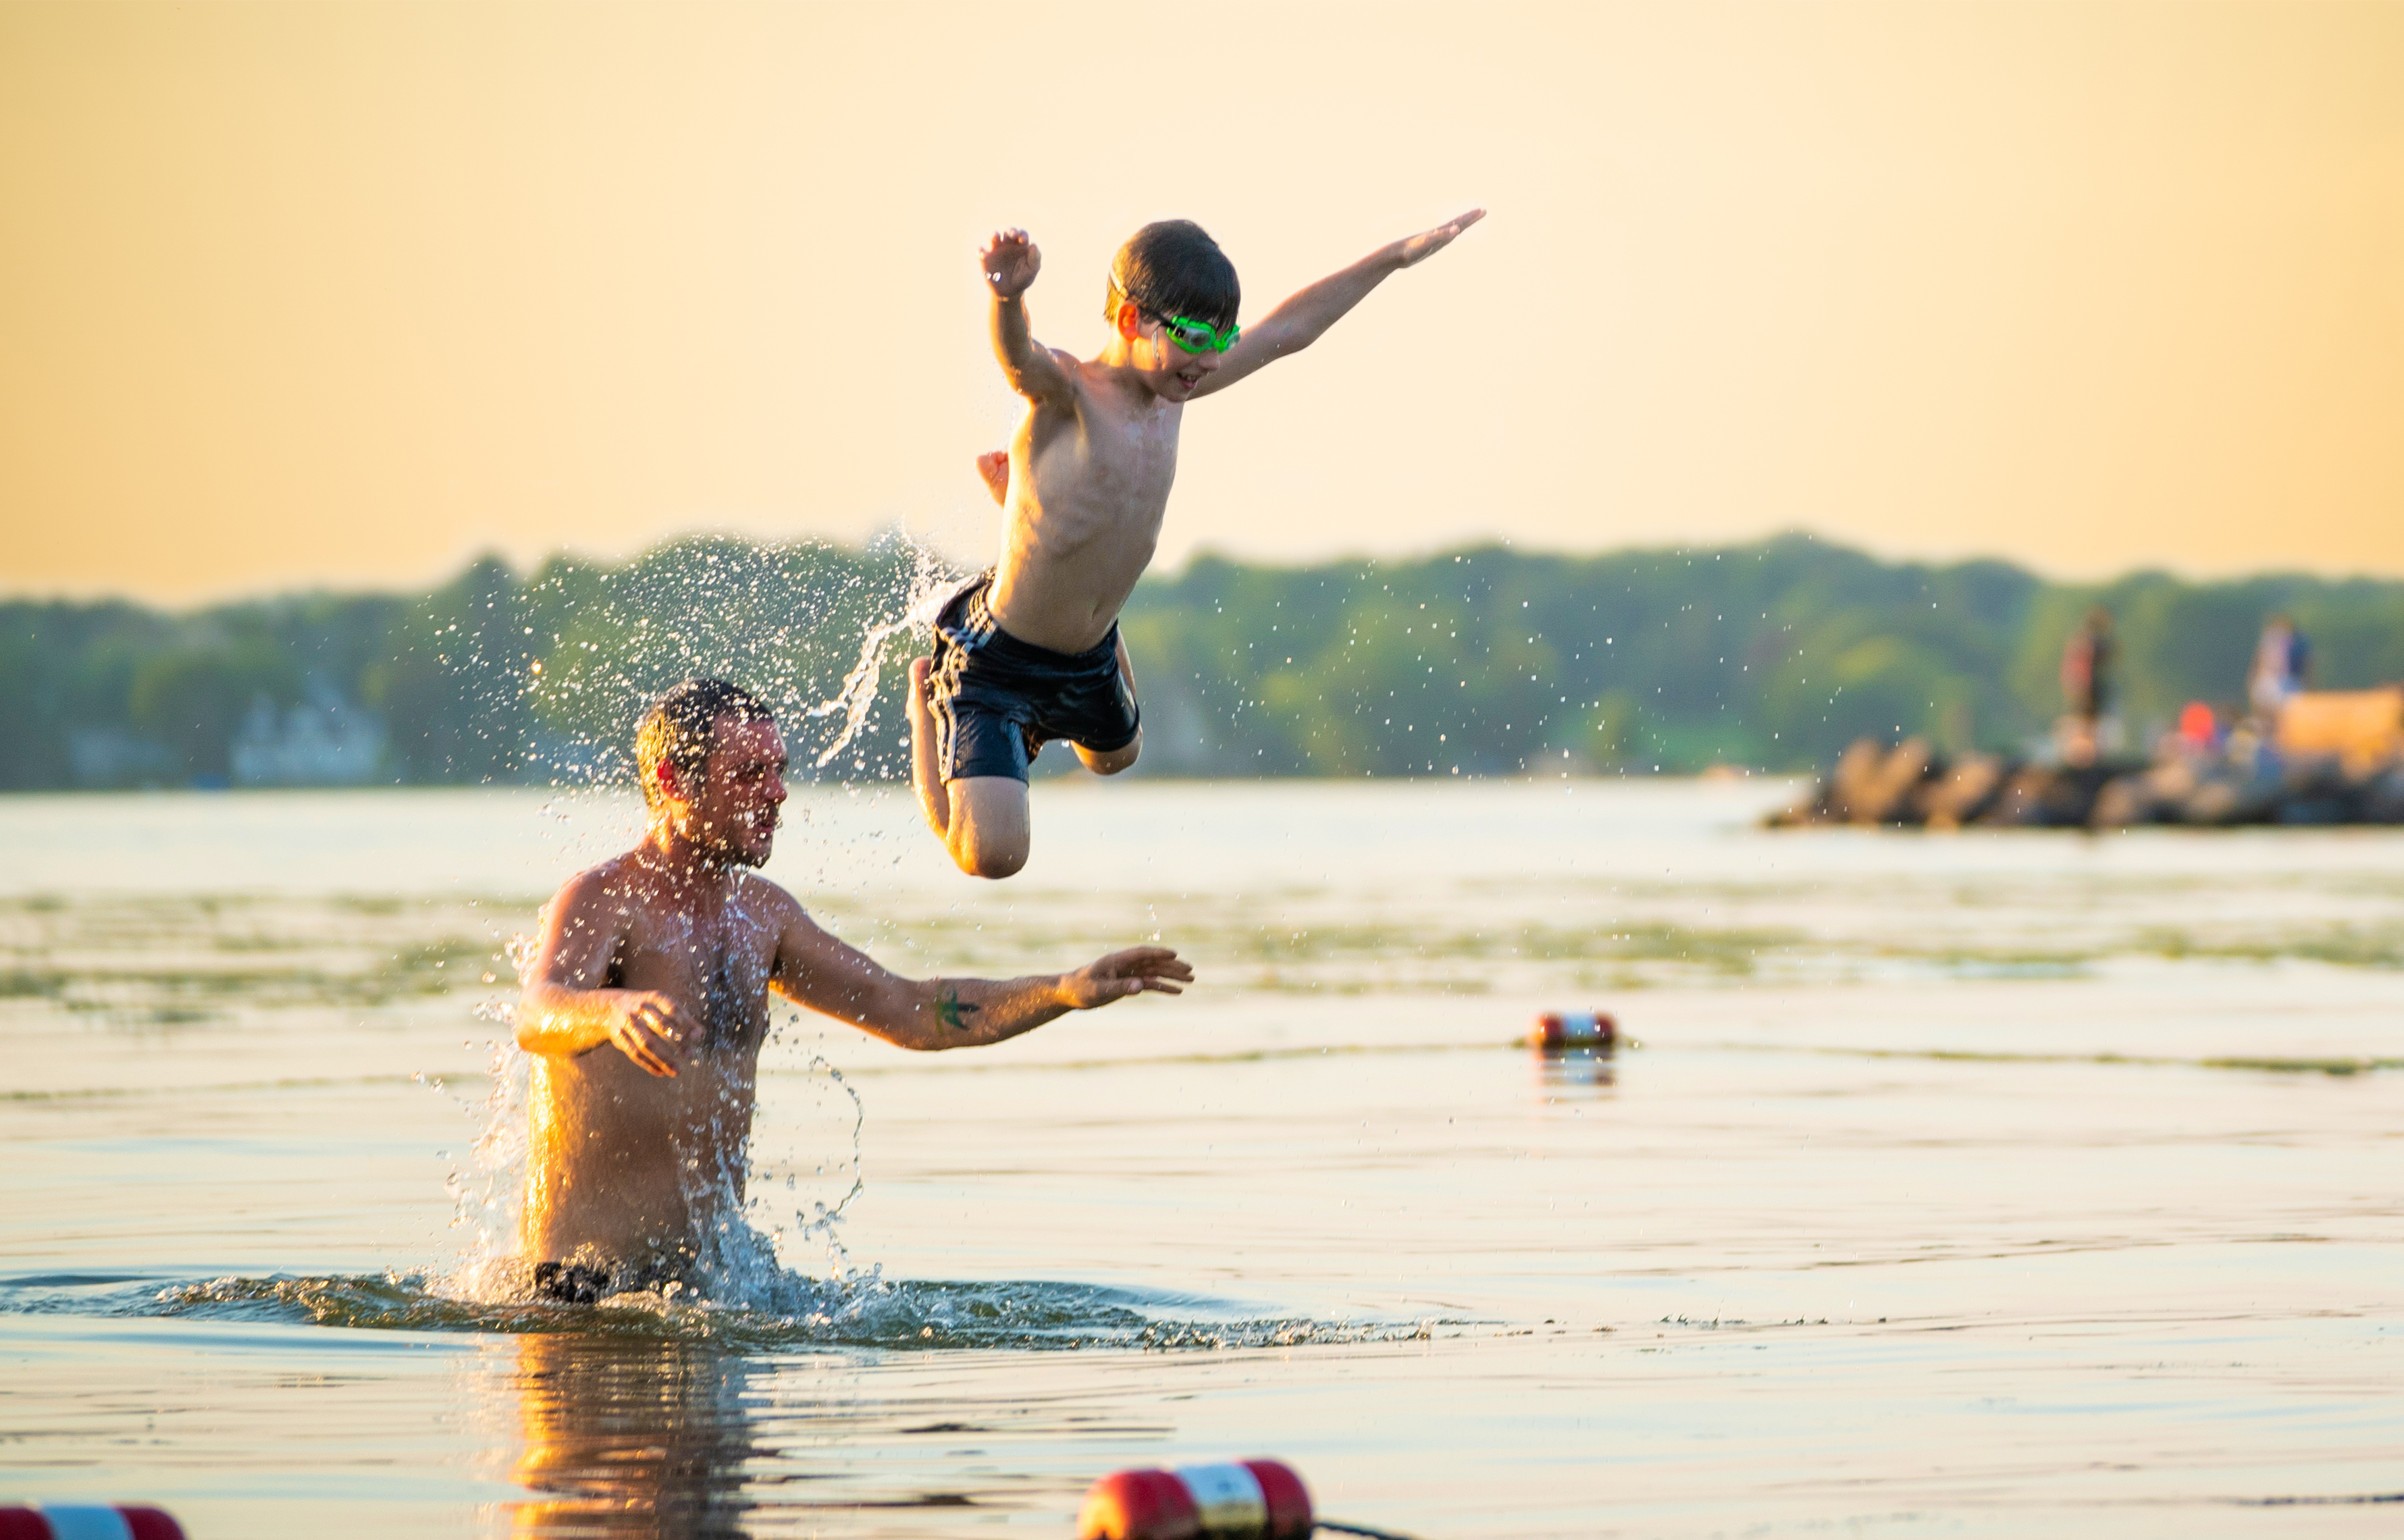 A child jumps off a man's shoulders into the water